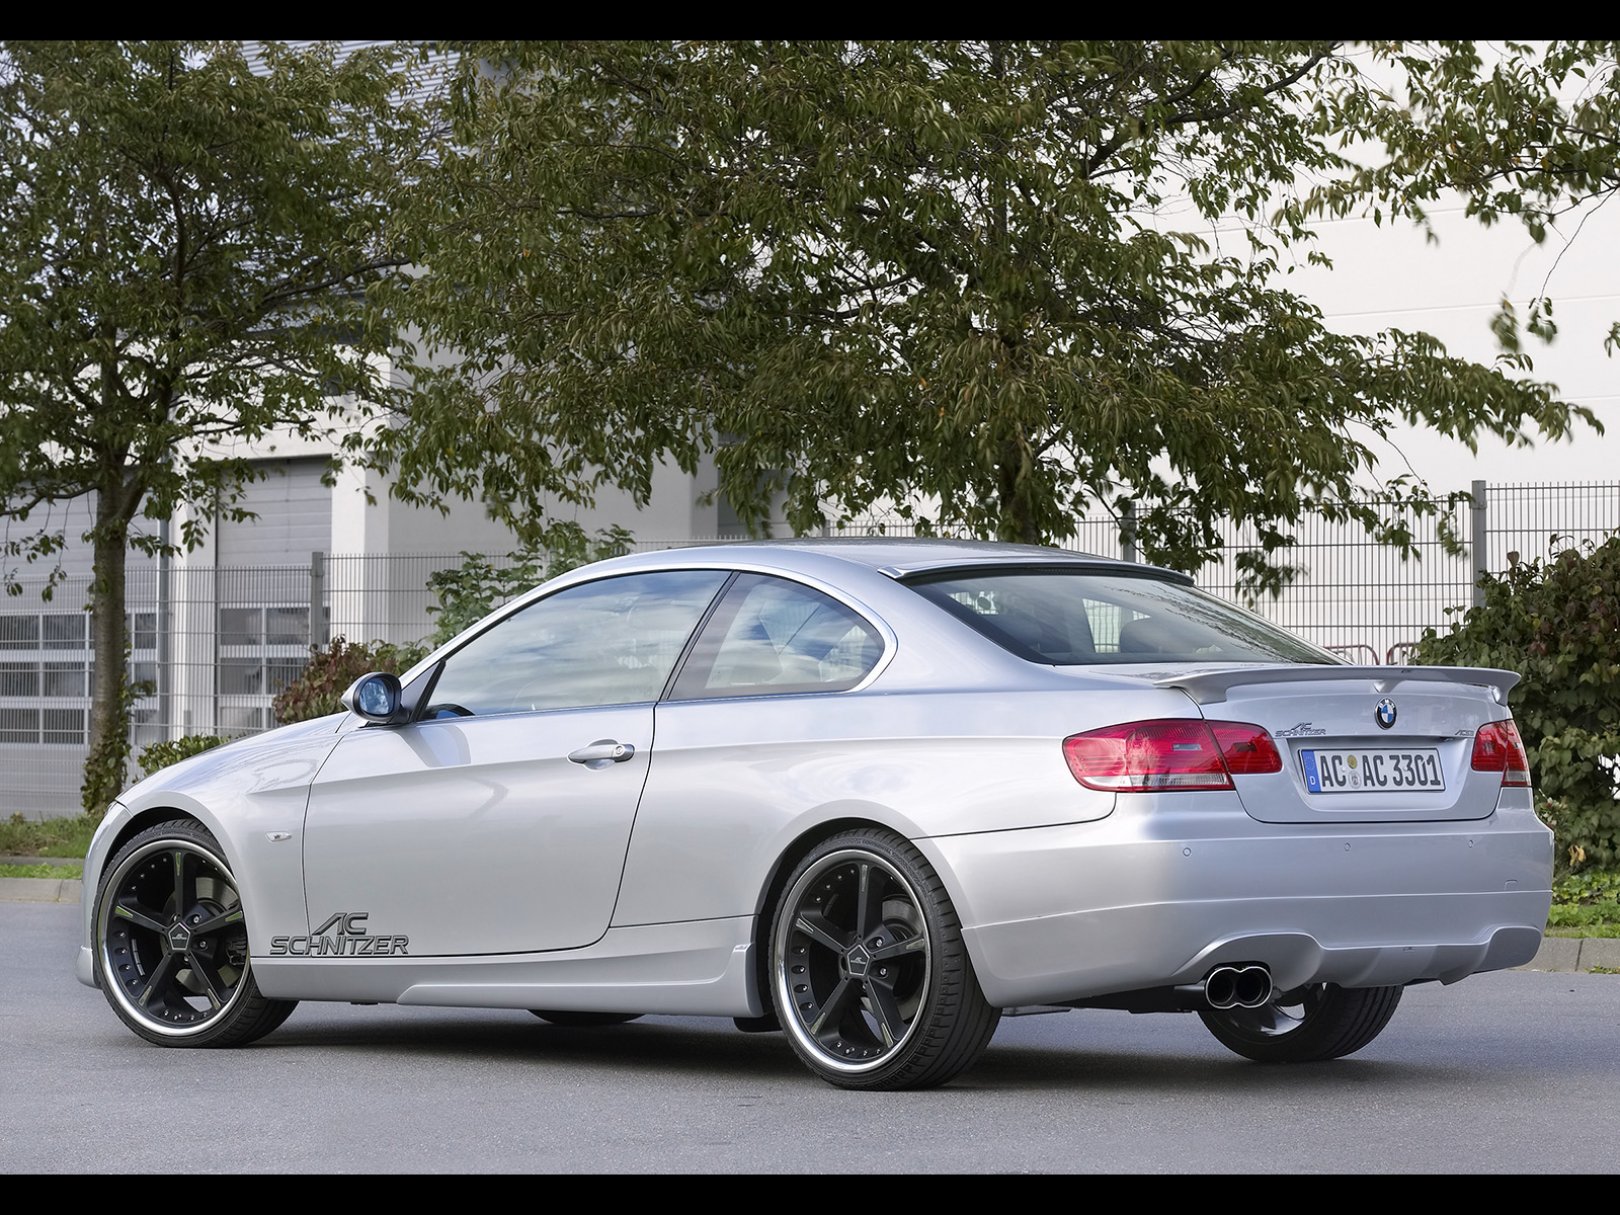 Foto: AC Schnitzer BMW E92 3 Series Coupe Rear And Driver Side (2007)